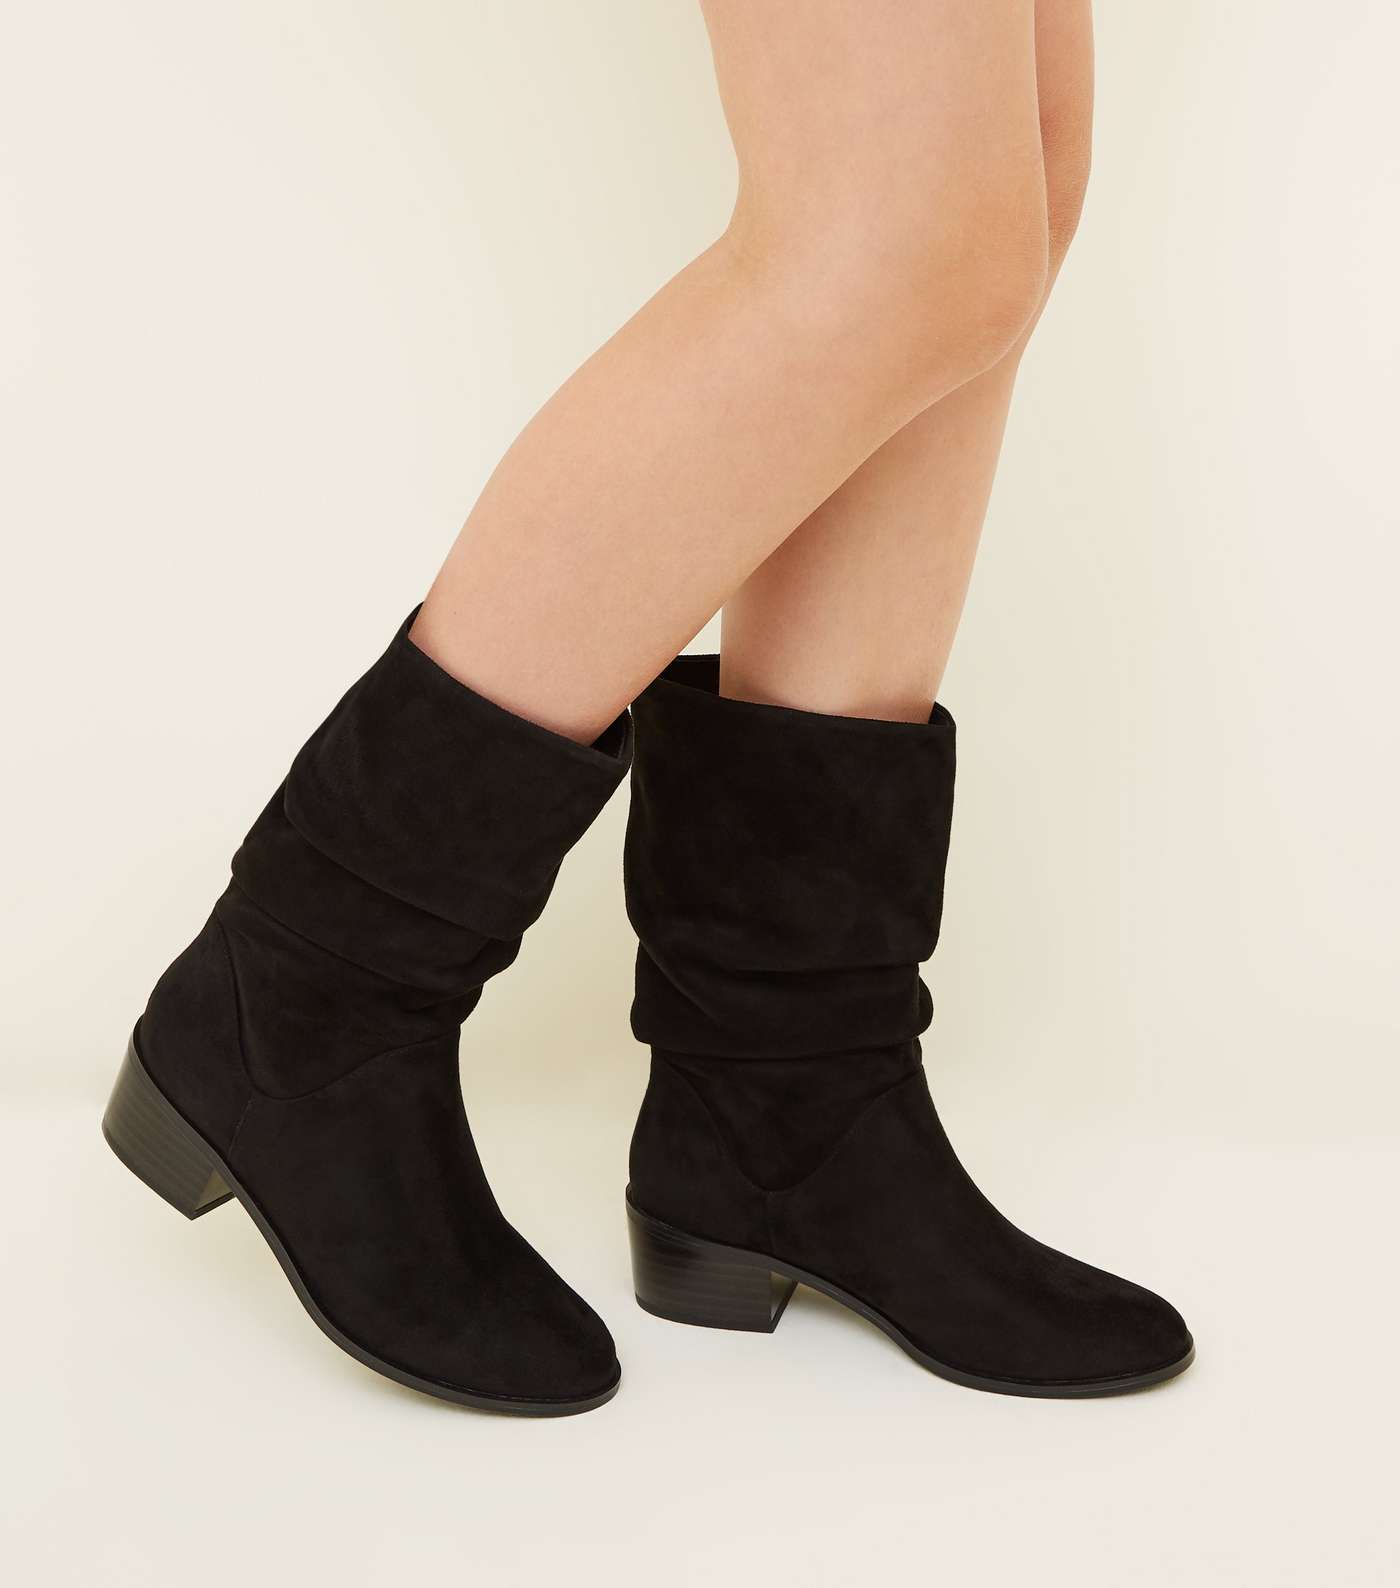 Girls Black Suedette Slouch Calf Boots Image 2